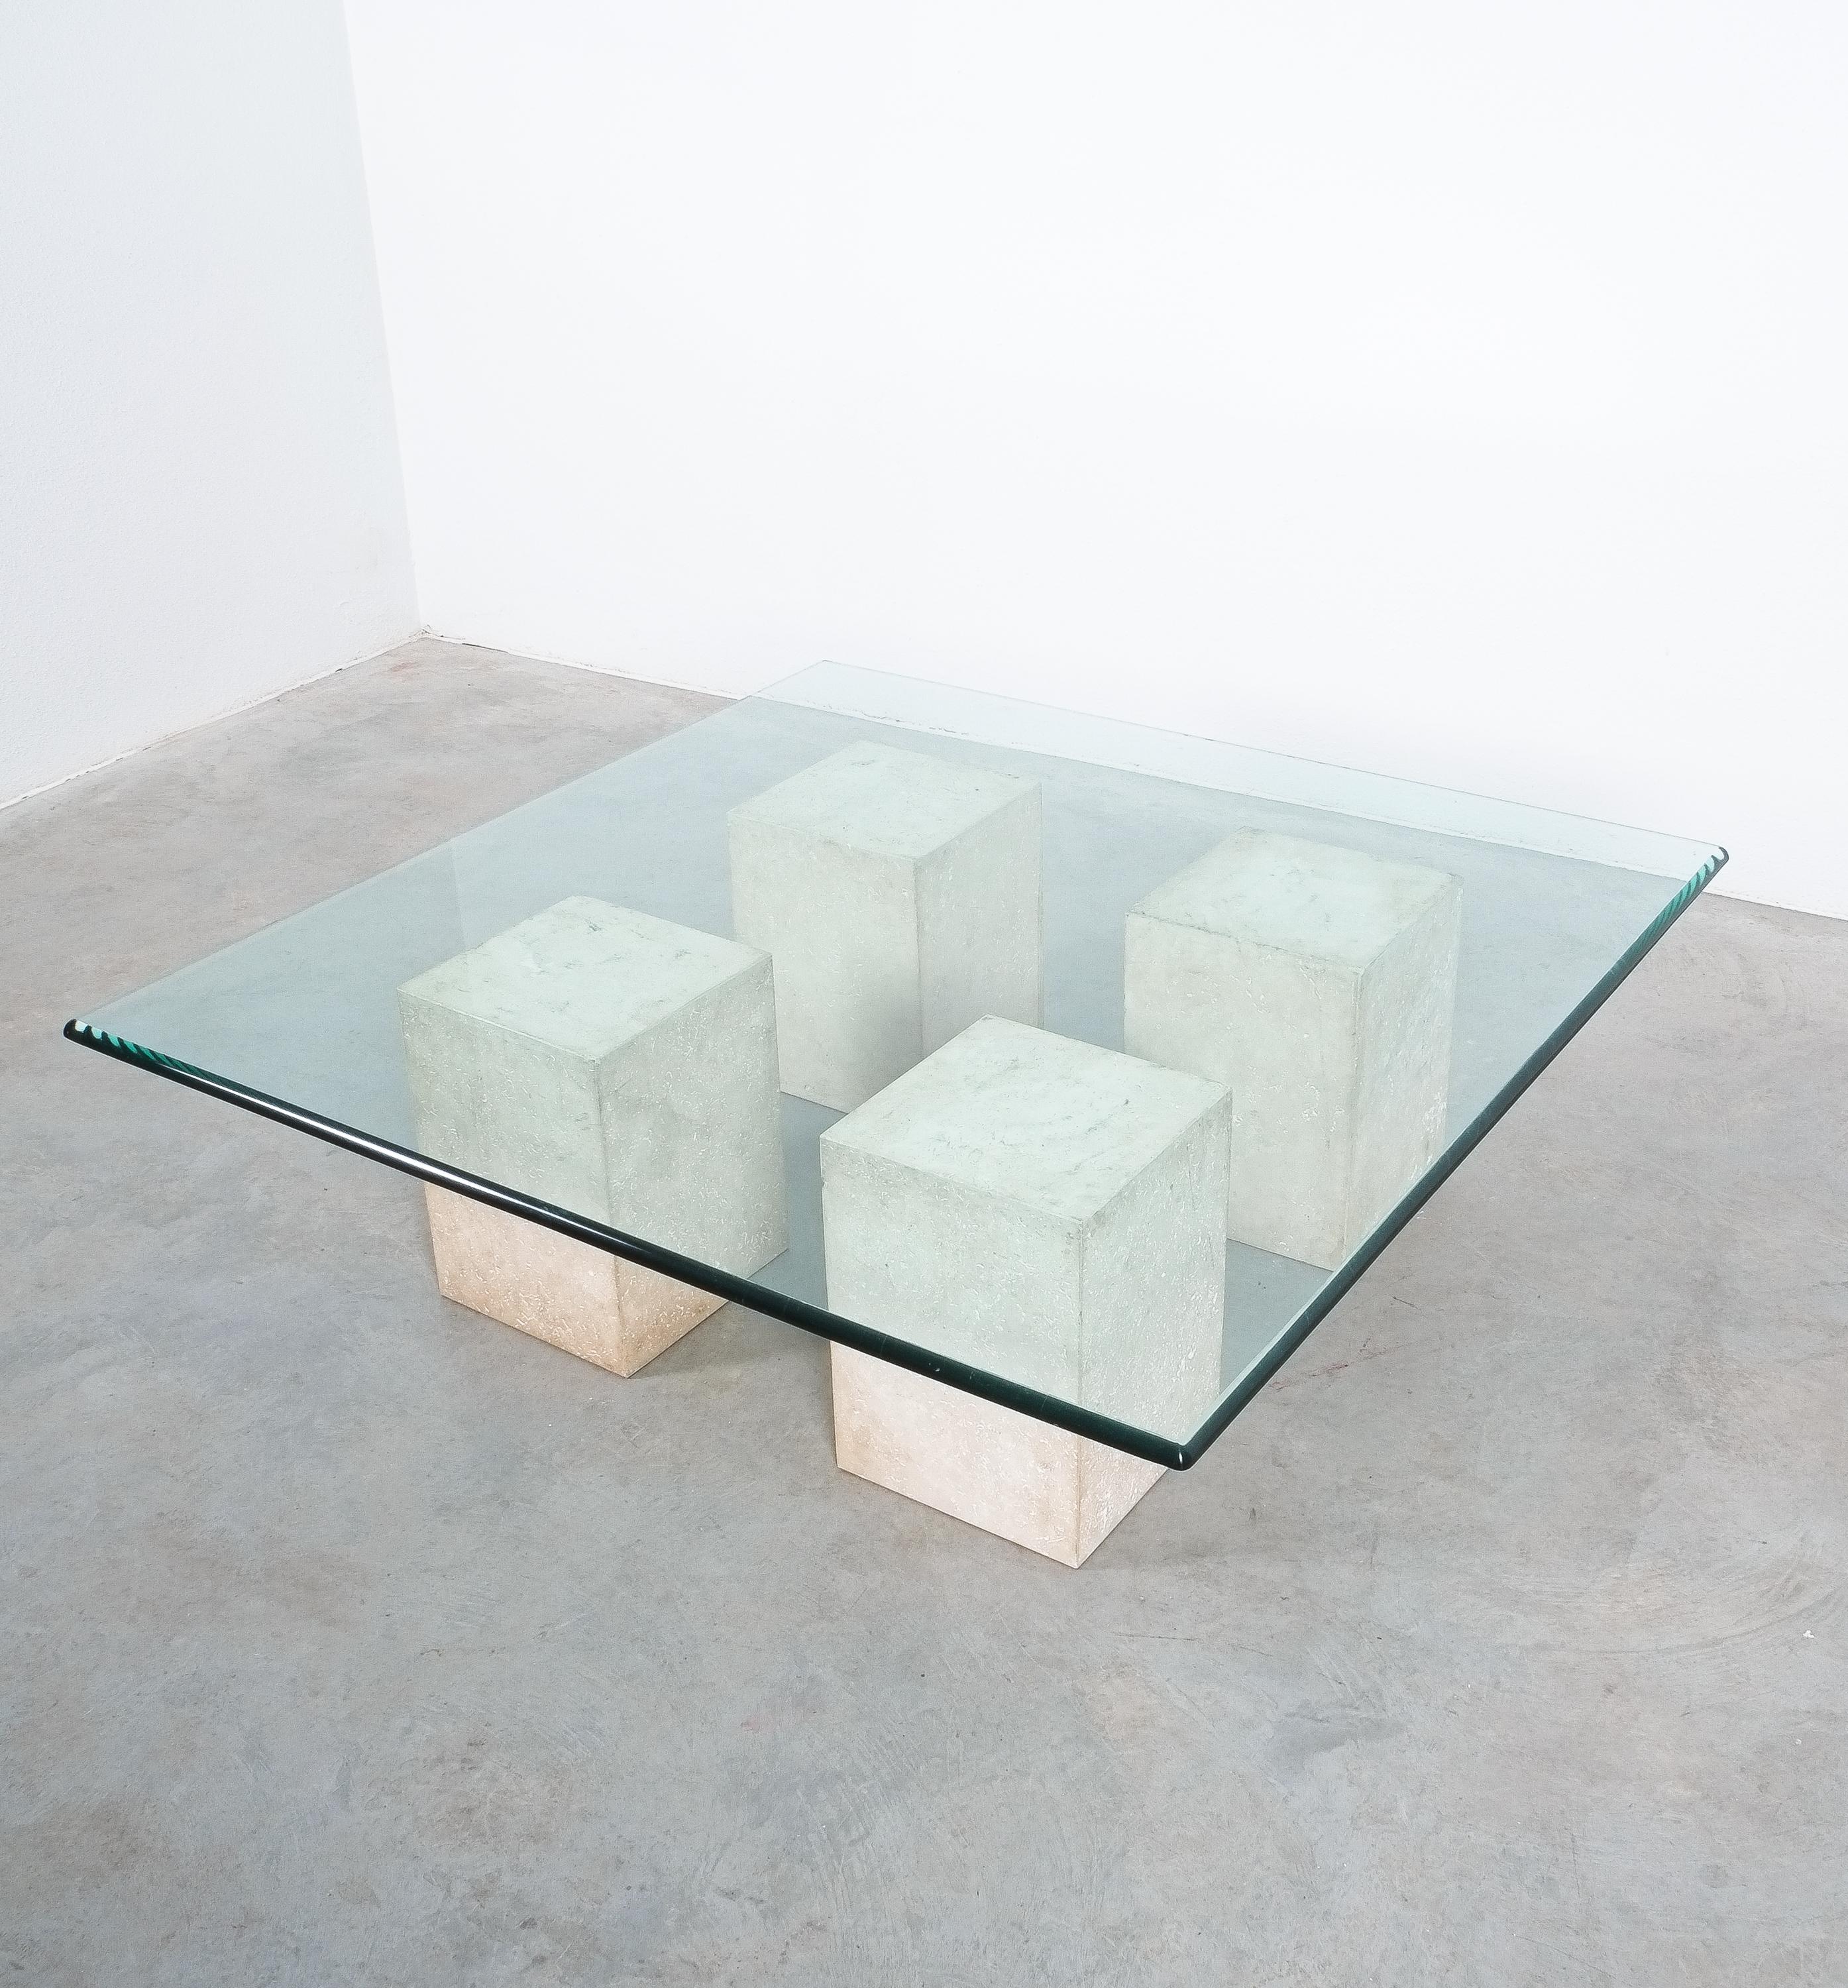 Monolithic travertine & glass coffee table Massimo Vignelli, Italy, circa 1970.

Large coffee table composed of 4 monolithic blocks from travertine and a 55 x 55 inch glass table top.
Total weight is about 180kg. Each block has about 20kg and the